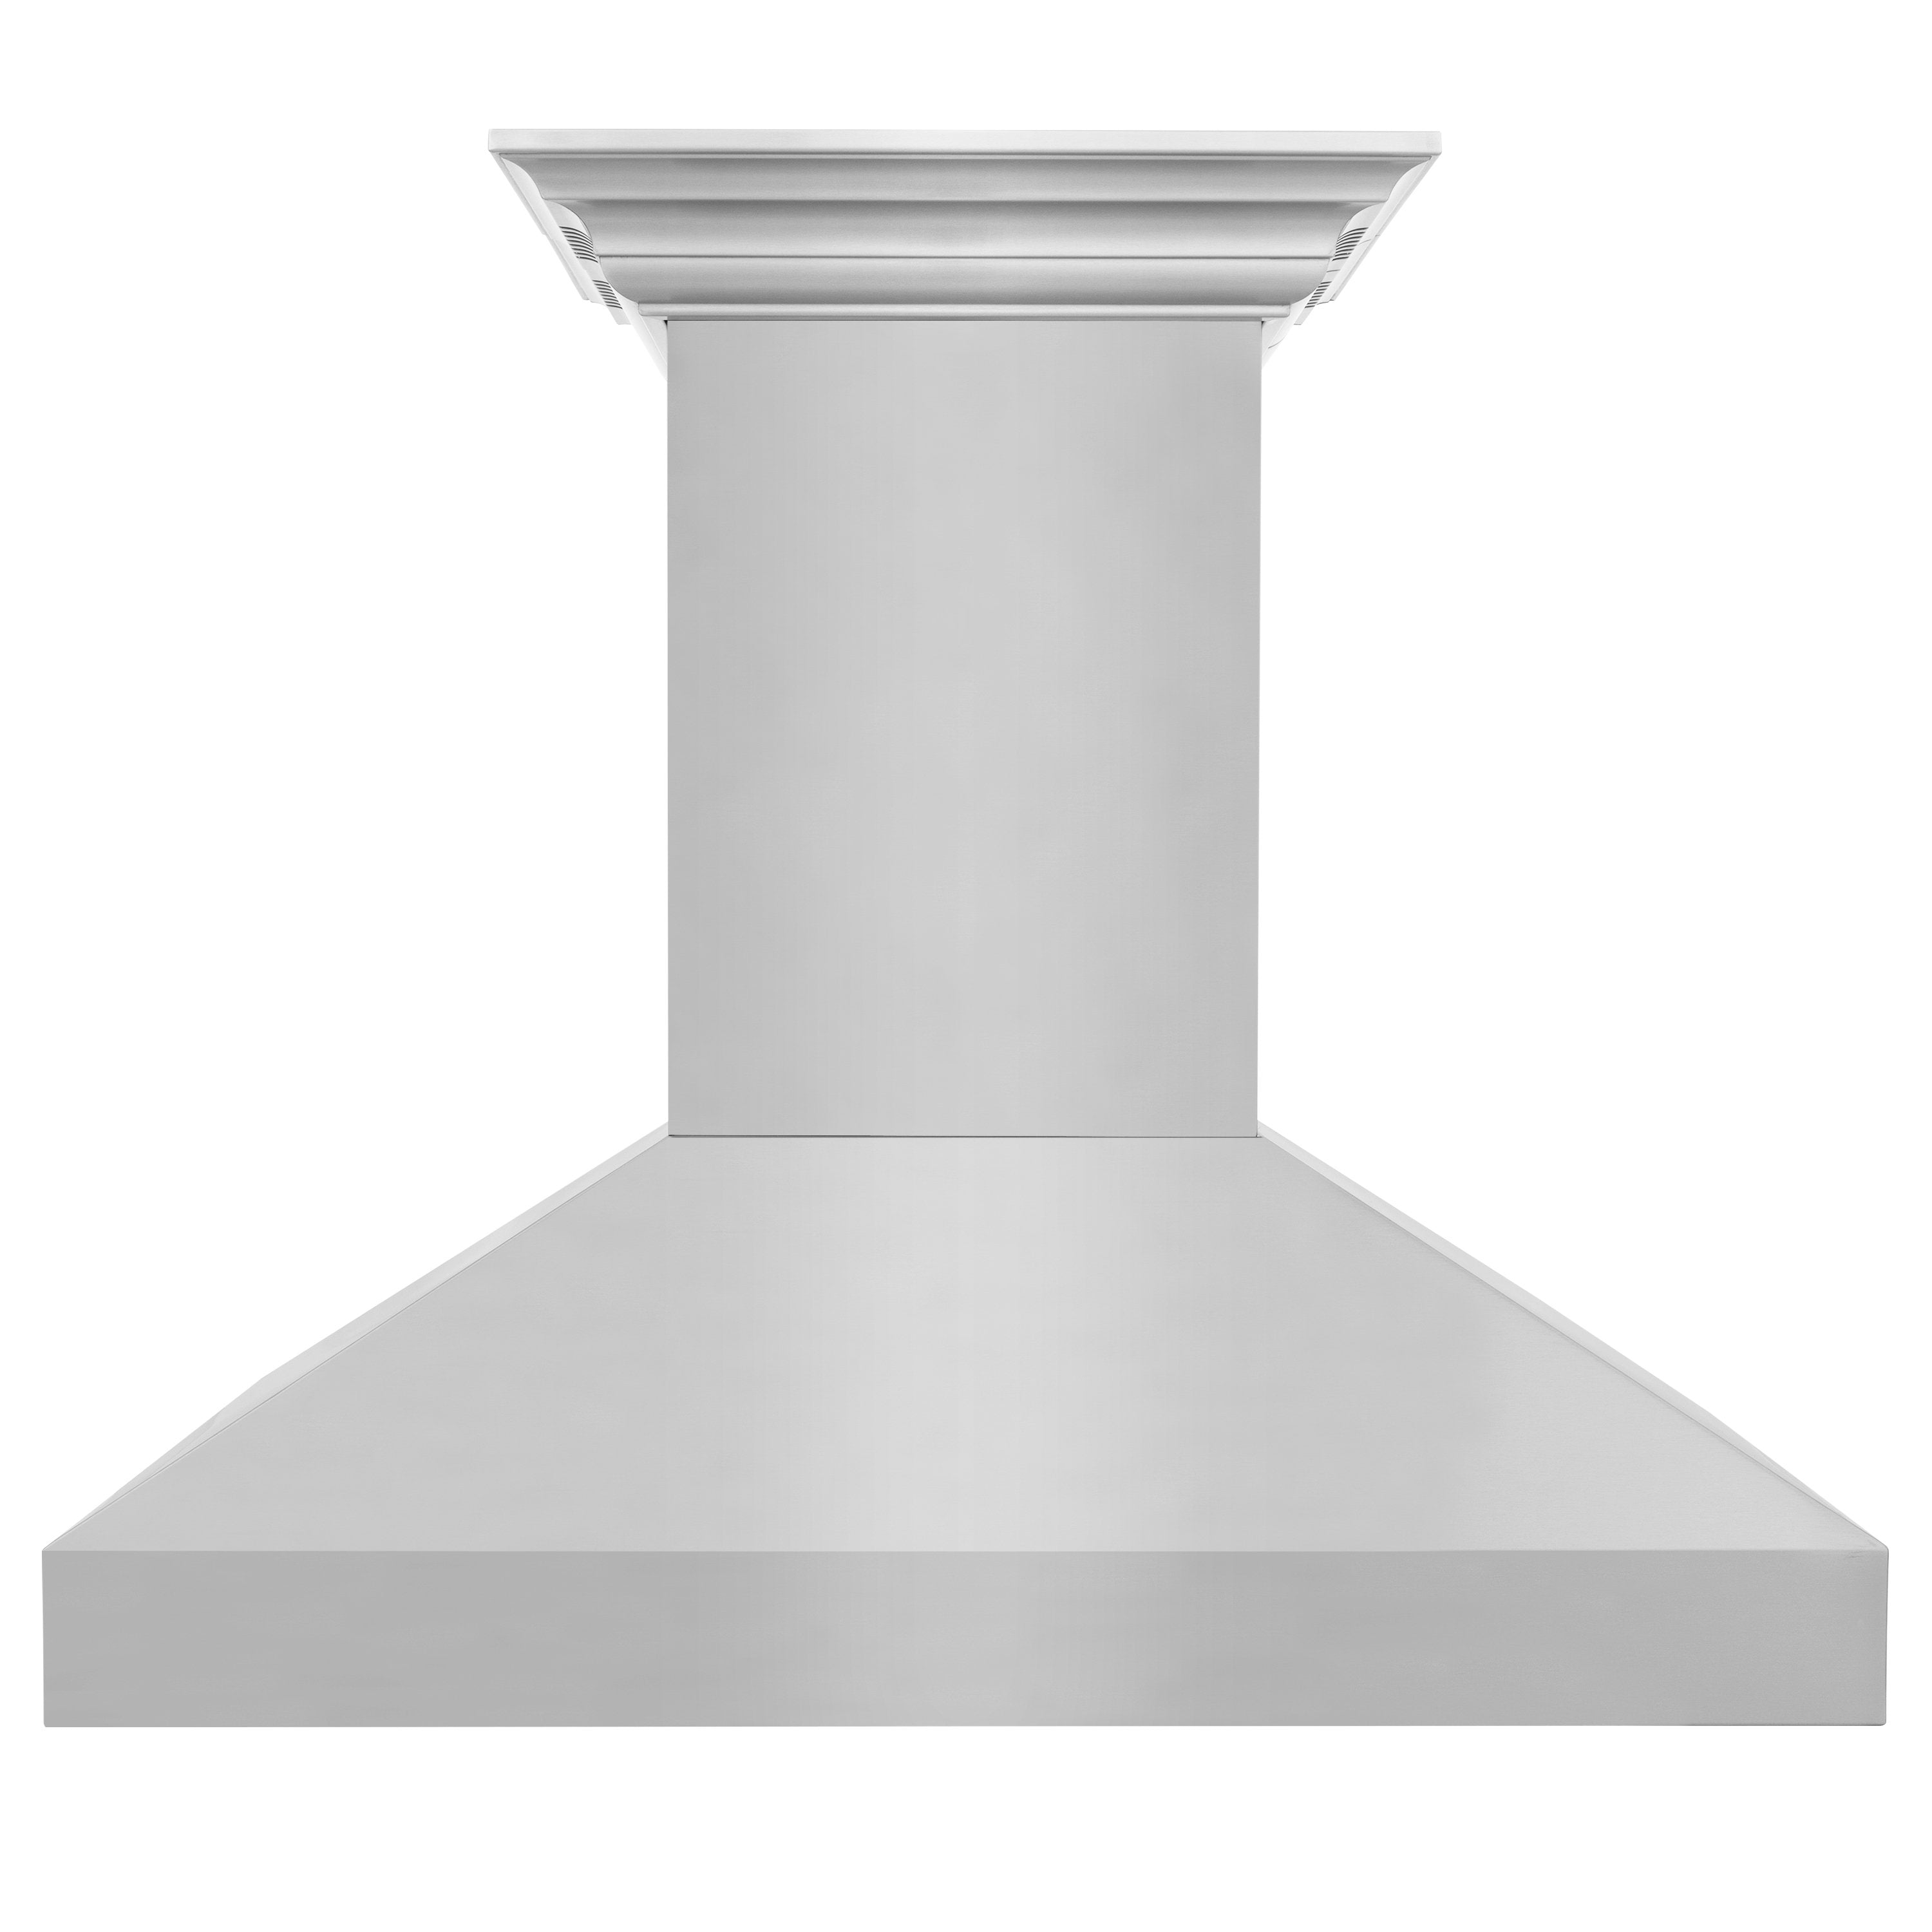 36" ZLINE CrownSound‚ Ducted Vent Island Mount Range Hood in Stainless Steel with Built-in Bluetooth Speakers (597iCRN-BT-36)